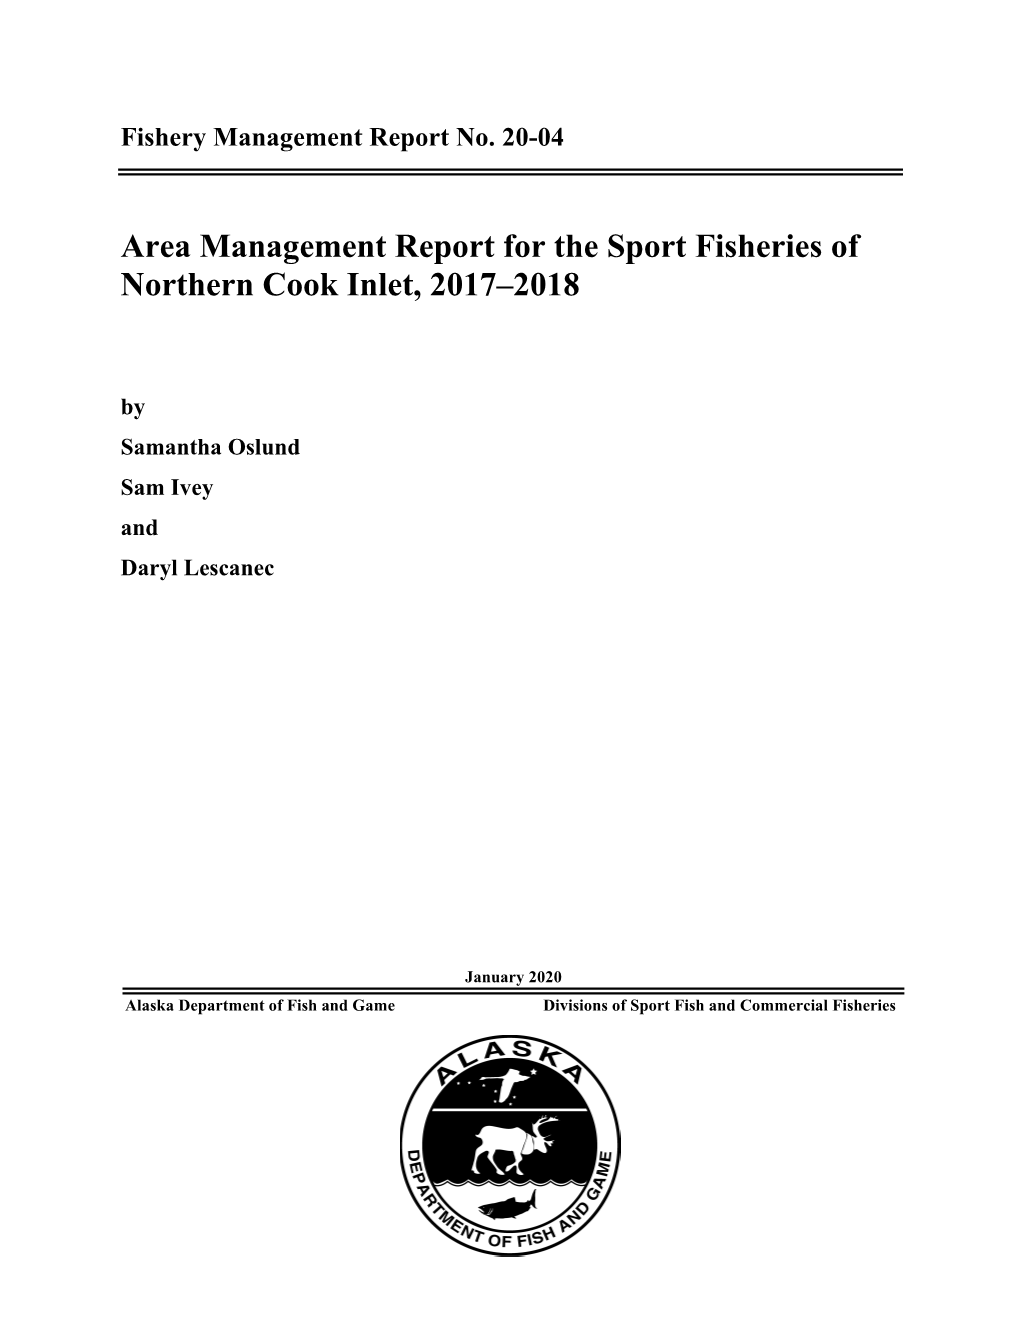 Area Management Report for the Sport Fisheries of Northern Cook Inlet, 2017–2018